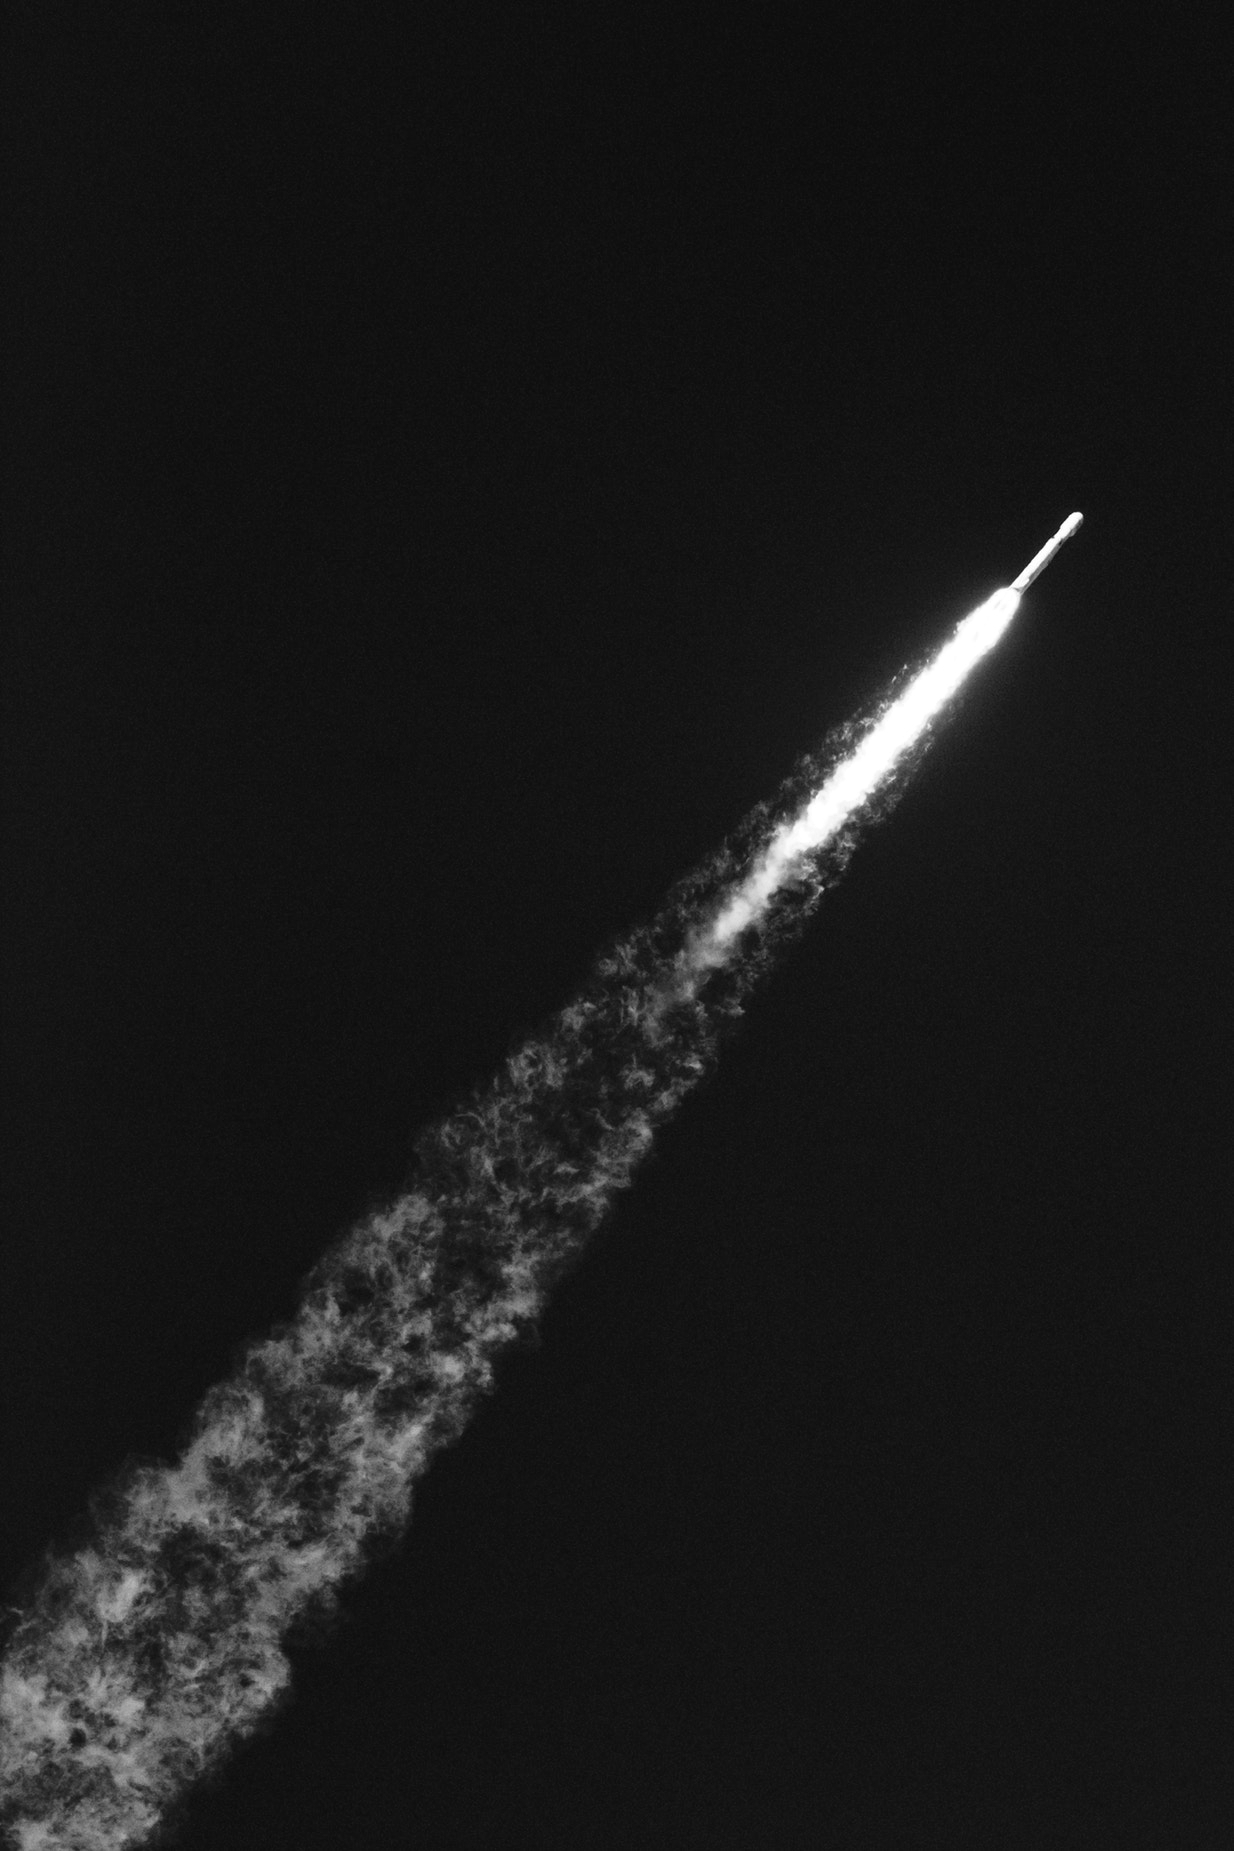 A rocket flying through space